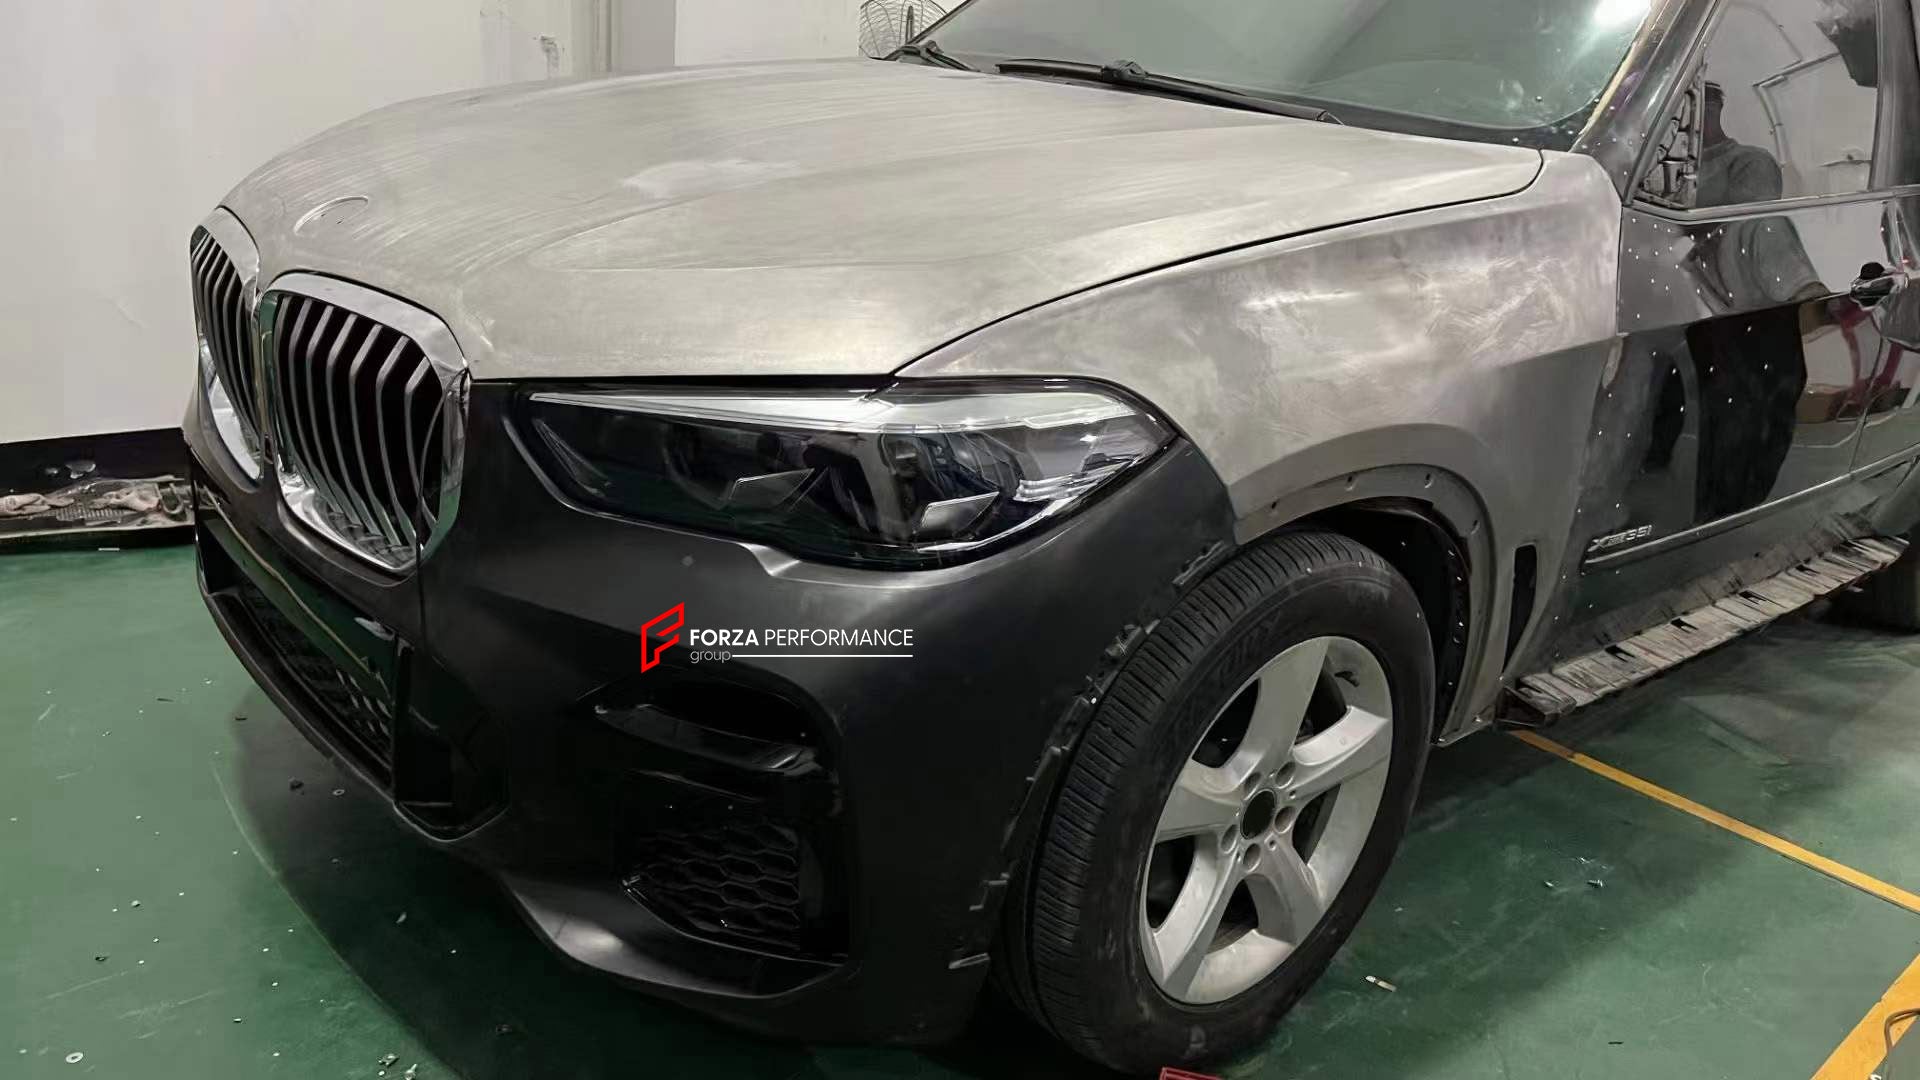 Hot Sale Body Kits for BMW X5 Series E70 2006-2013 Upgrade to G05